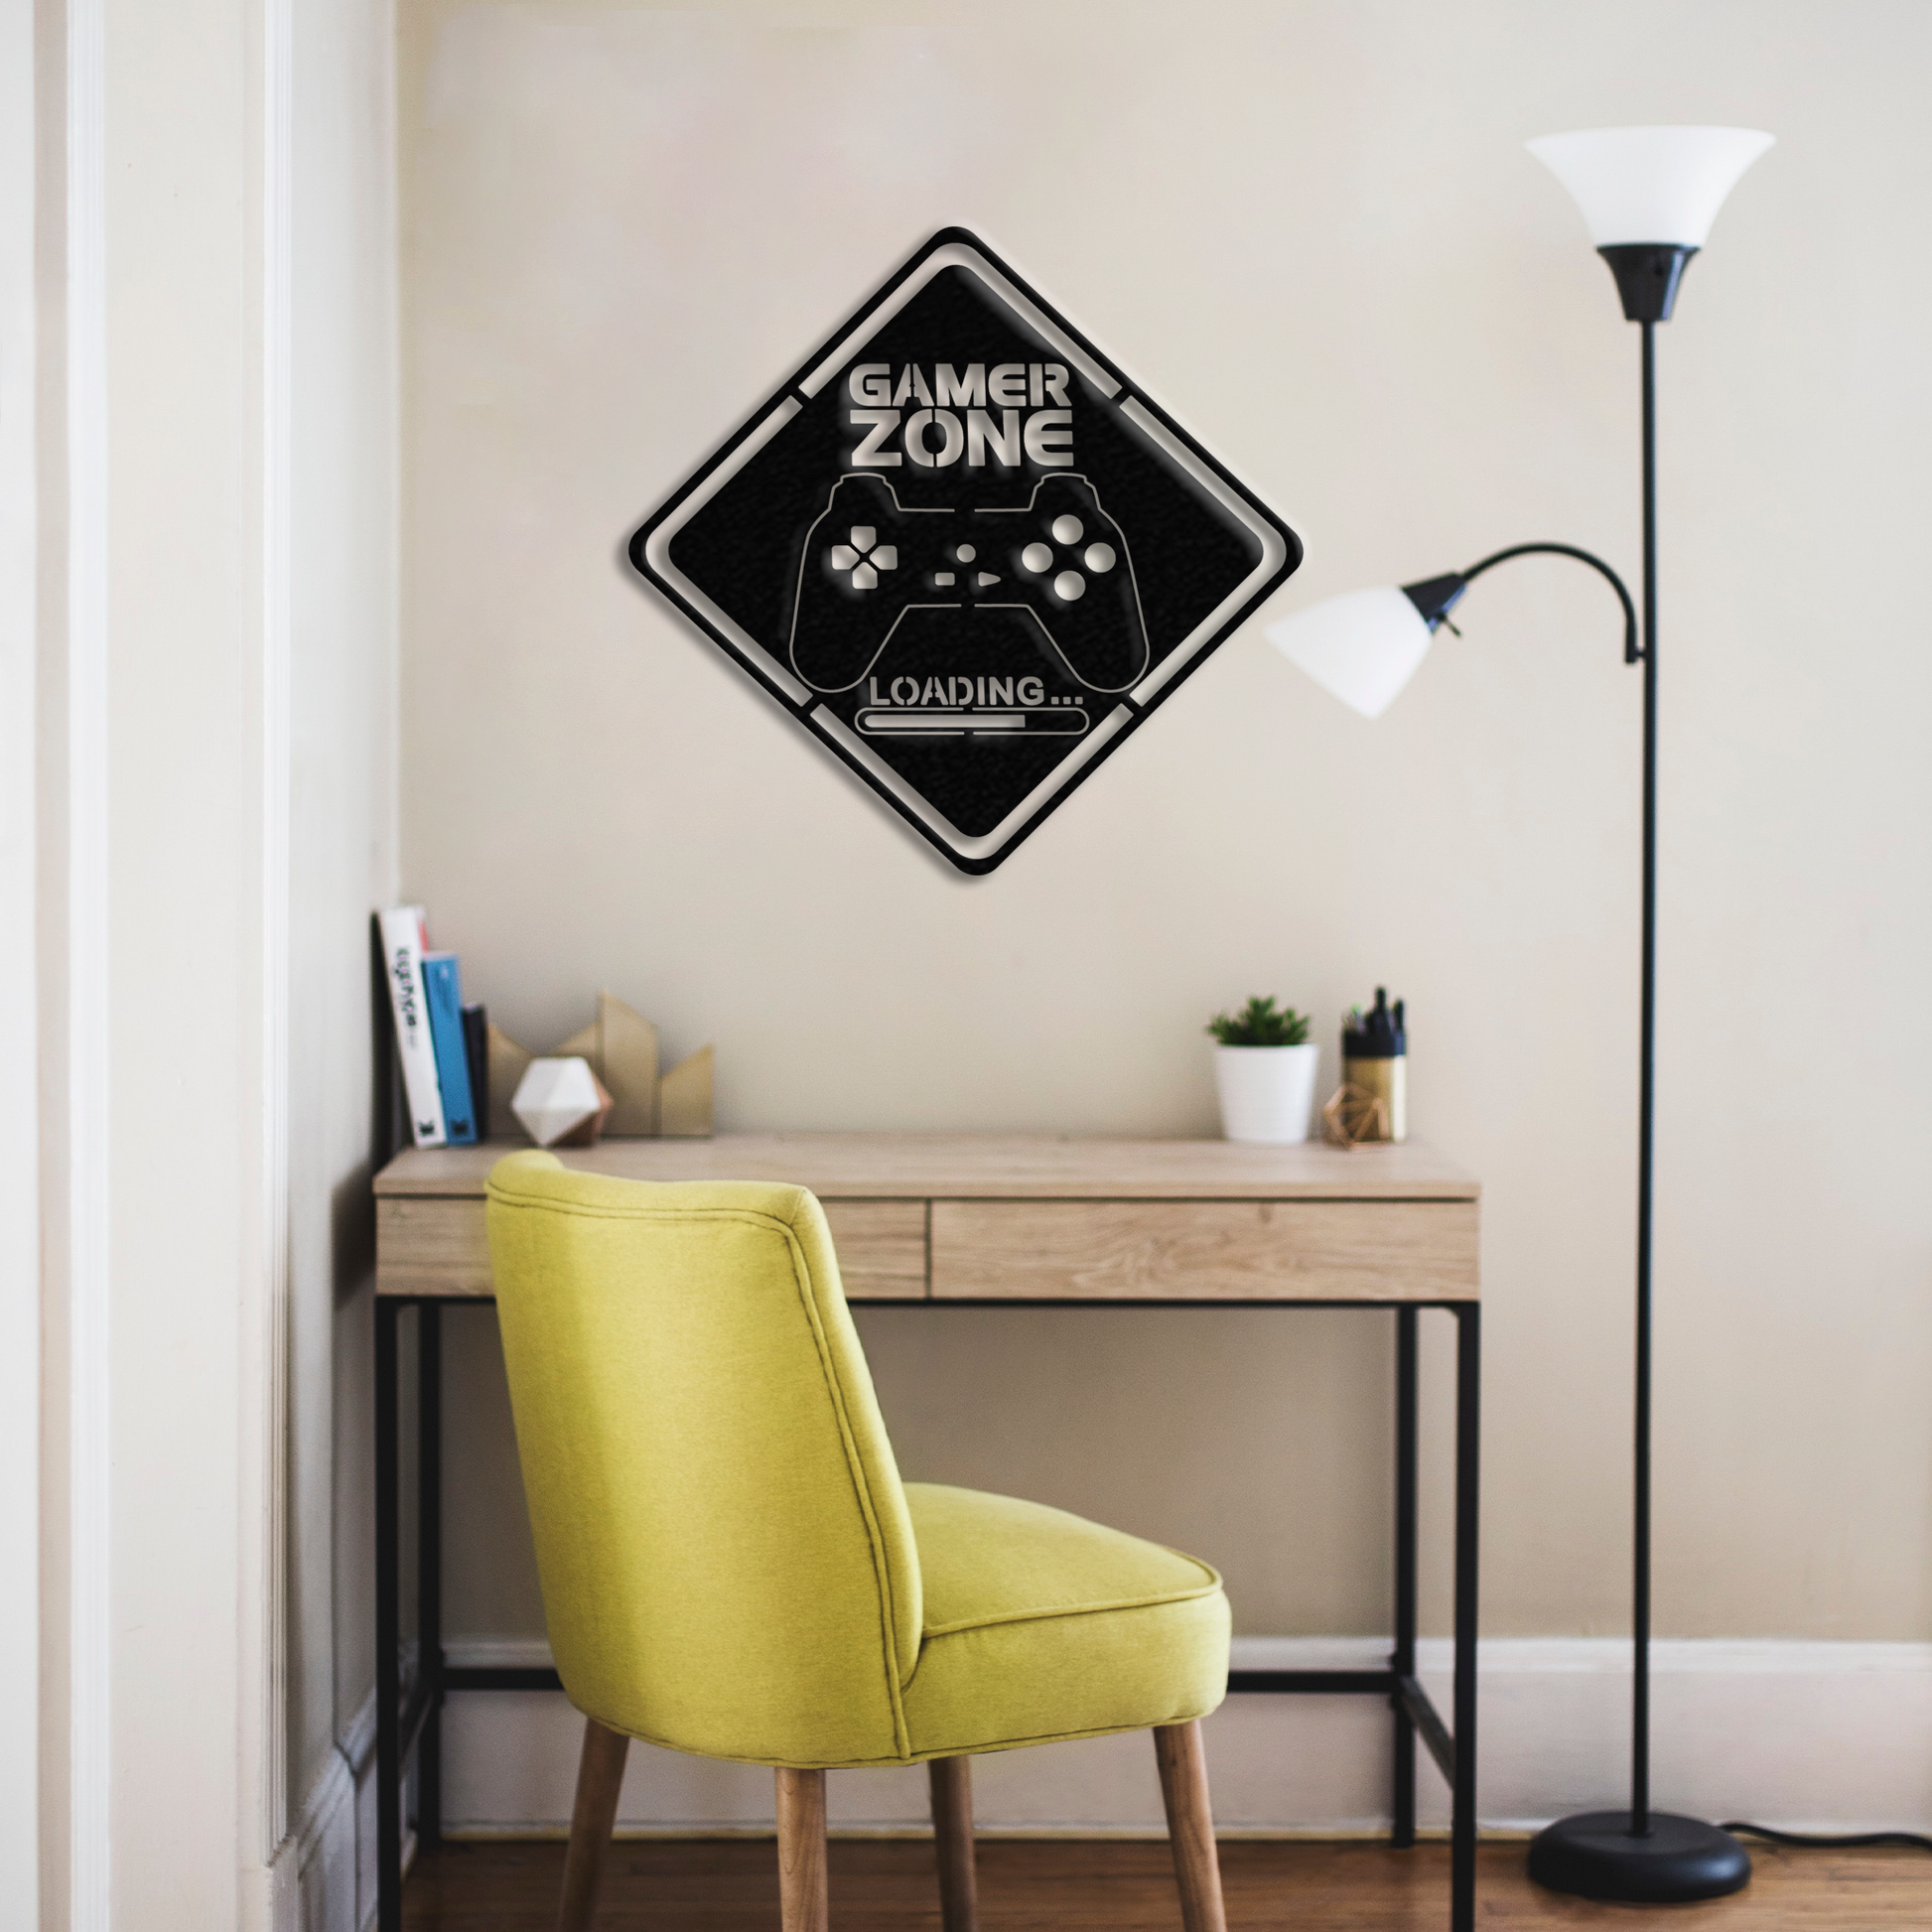 Gamer Zone - Metal Wall Art On Behind Above A Desk - Badger Steel USA